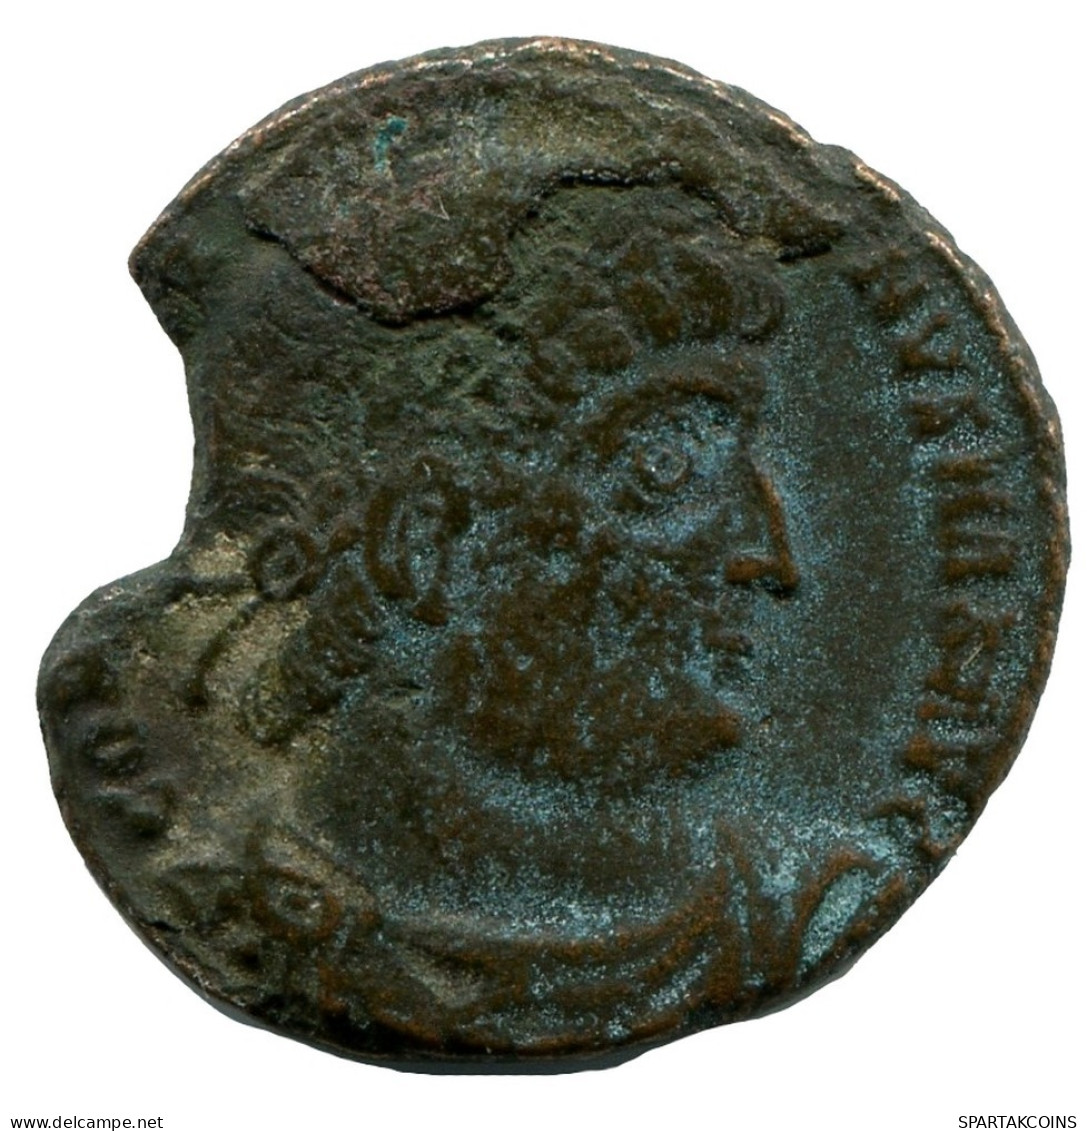 CONSTANTINE I MINTED IN ANTIOCH FOUND IN IHNASYAH HOARD EGYPT #ANC10712.14.D.A - The Christian Empire (307 AD Tot 363 AD)